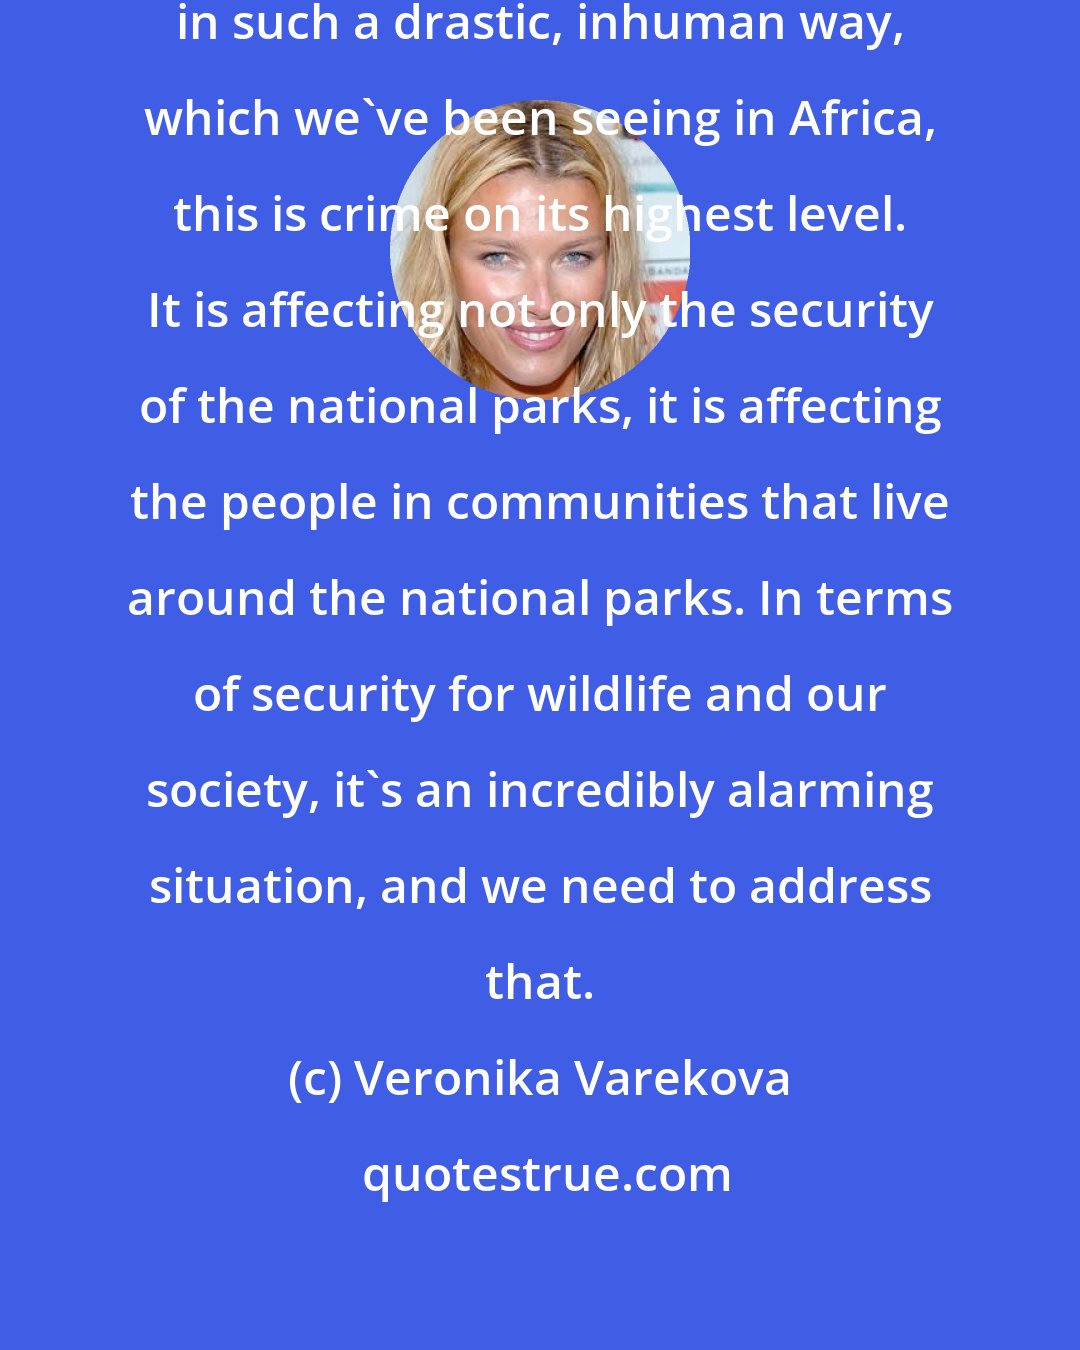 Veronika Varekova: We are all going to die. When it happens in such a drastic, inhuman way, which we've been seeing in Africa, this is crime on its highest level. It is affecting not only the security of the national parks, it is affecting the people in communities that live around the national parks. In terms of security for wildlife and our society, it's an incredibly alarming situation, and we need to address that.